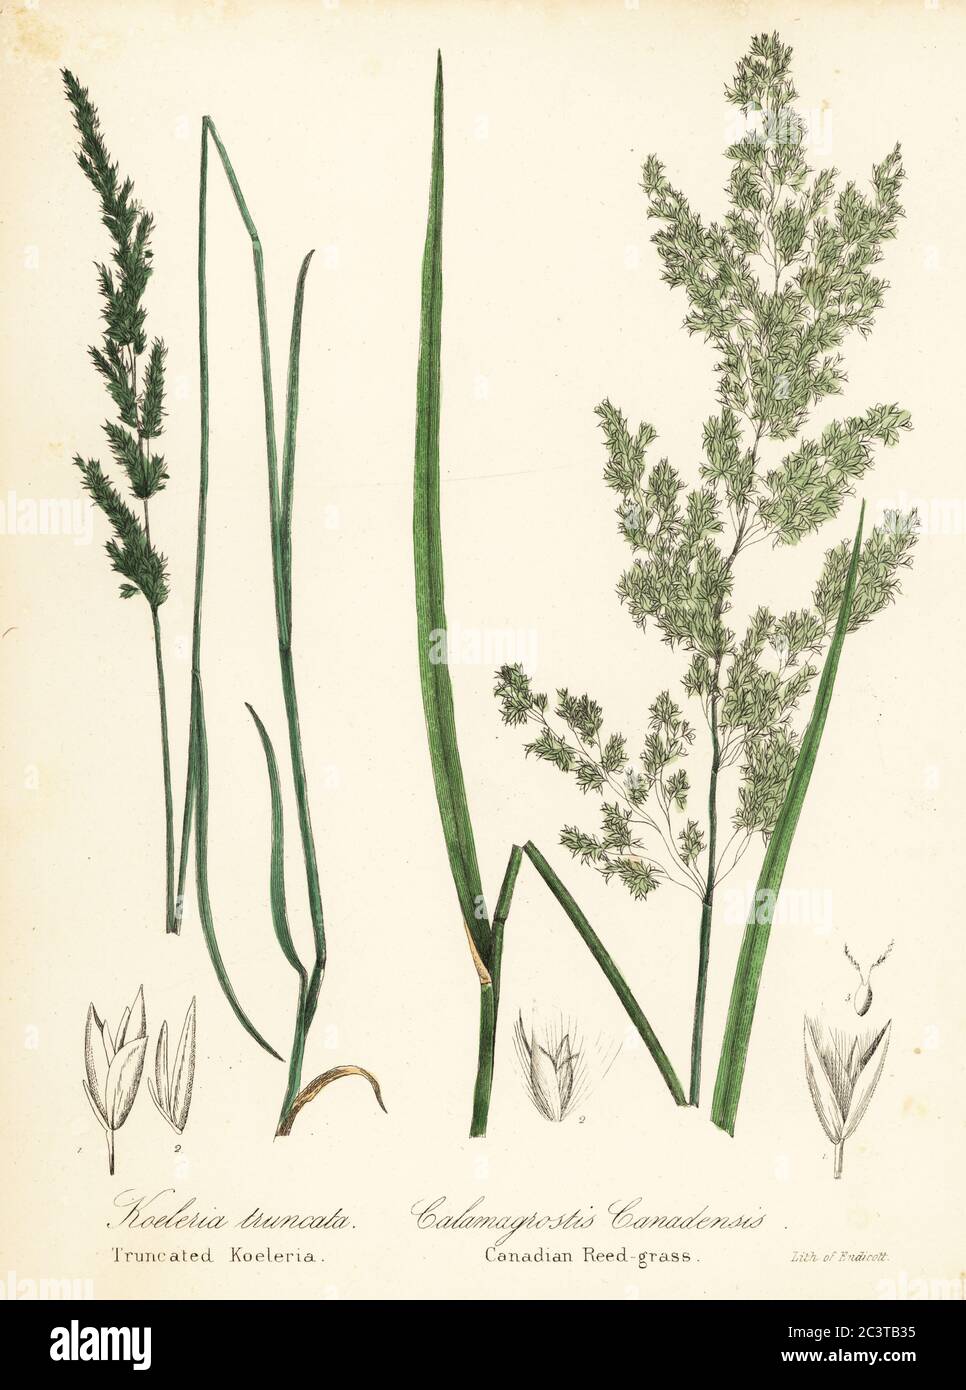 Prairie wedgescale, Sphenopholis obtusata, and Canadian reed-grass, Calamagrostis canadensis. Handcoloured lithograph by Endicott after a botanical illustration from John Torrey’s A Flora of the State of New York, Carroll and Cook, Albany, 1843. The plates drawn by John Torrey, Agnes Mitchell, Elizabeth Paoley and Swinton. John Torrey was an American botanist, chemist and physician 1796-1873. Stock Photo